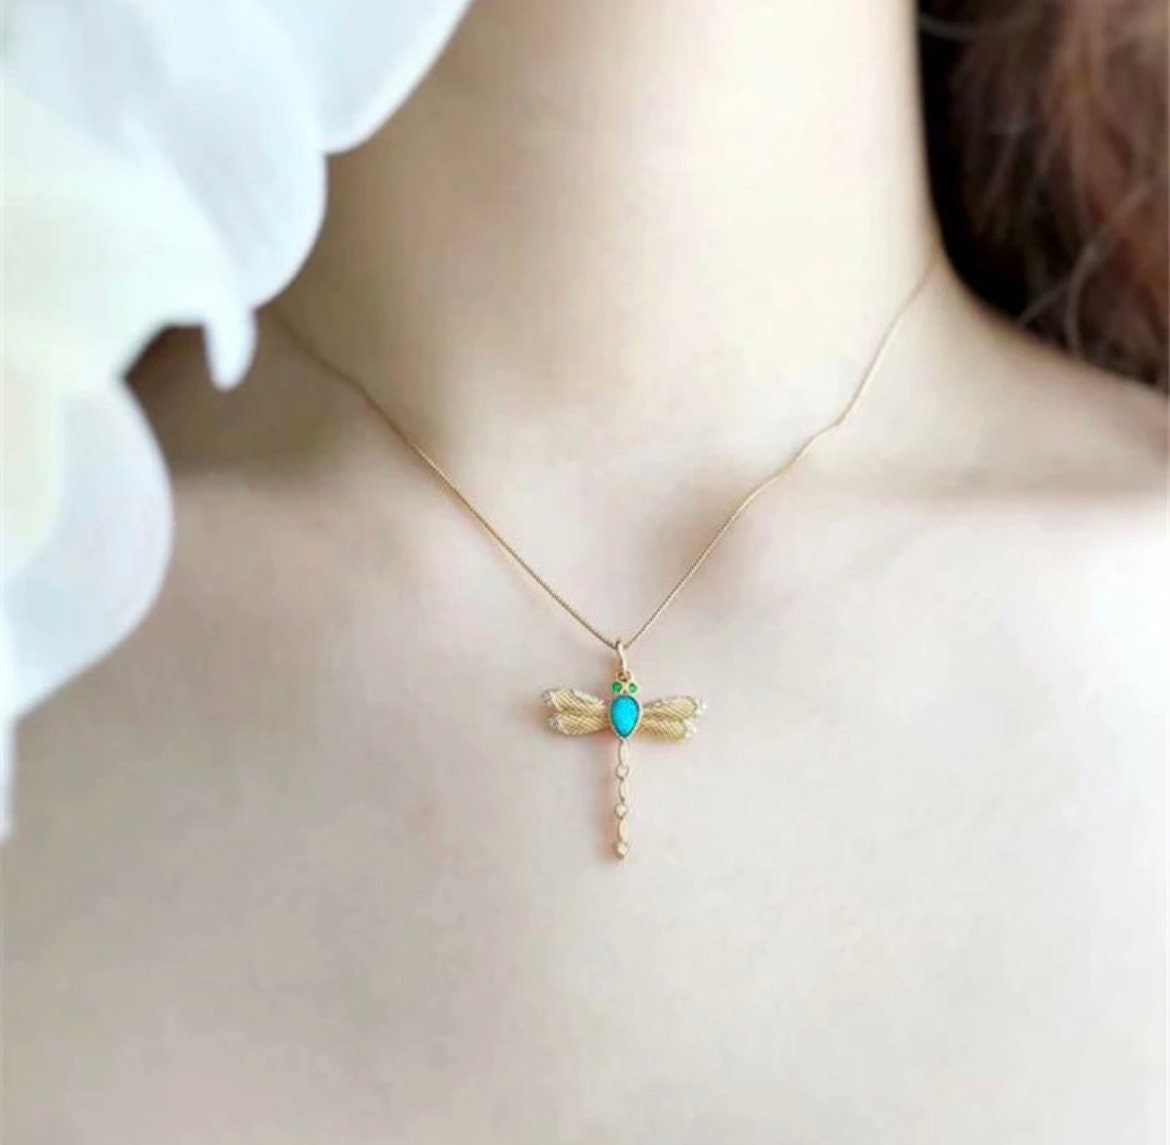 Product Detail:  18k Gold Main Stone: .013ct Opal Size 2.4 x 4.85 mm 0.017ct Natural Green Emerald 0.076ct Natural Diamonds SI Clarity Color IJ Pendant Size 19.97 x 27.06 mm Necklace Weight 2.66g Necklace Length 45cm